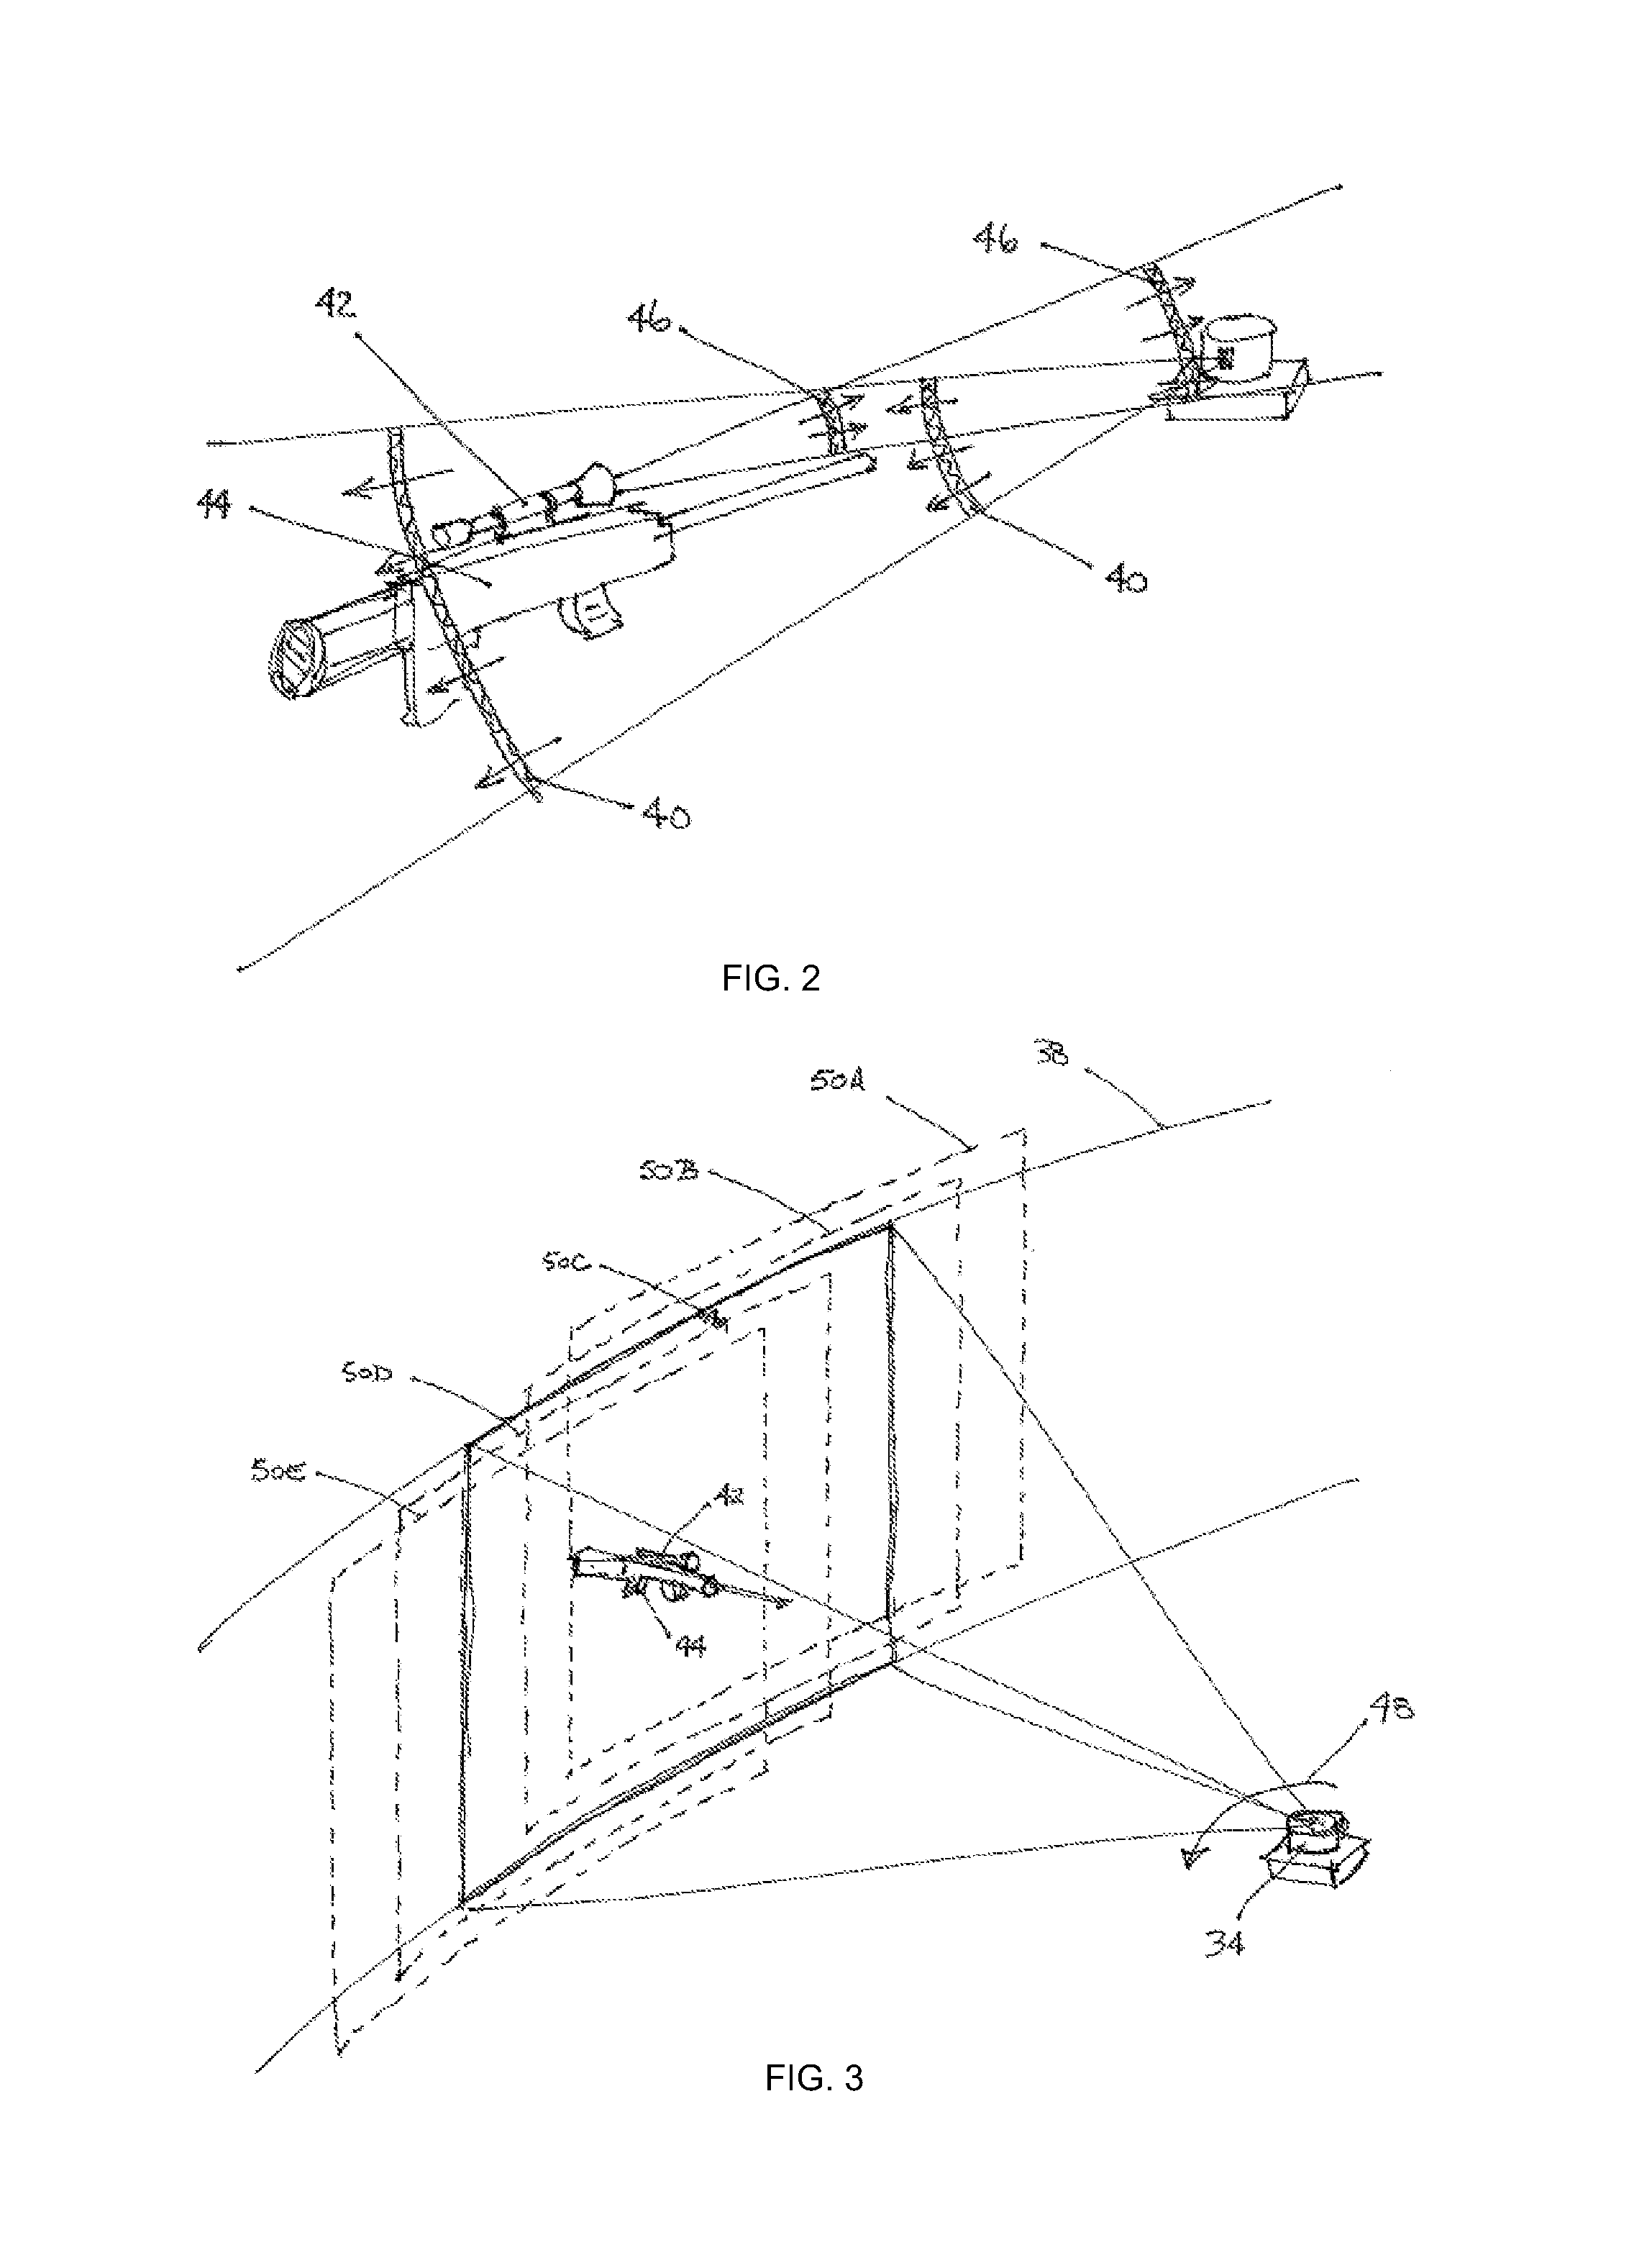 System and method for optics detection